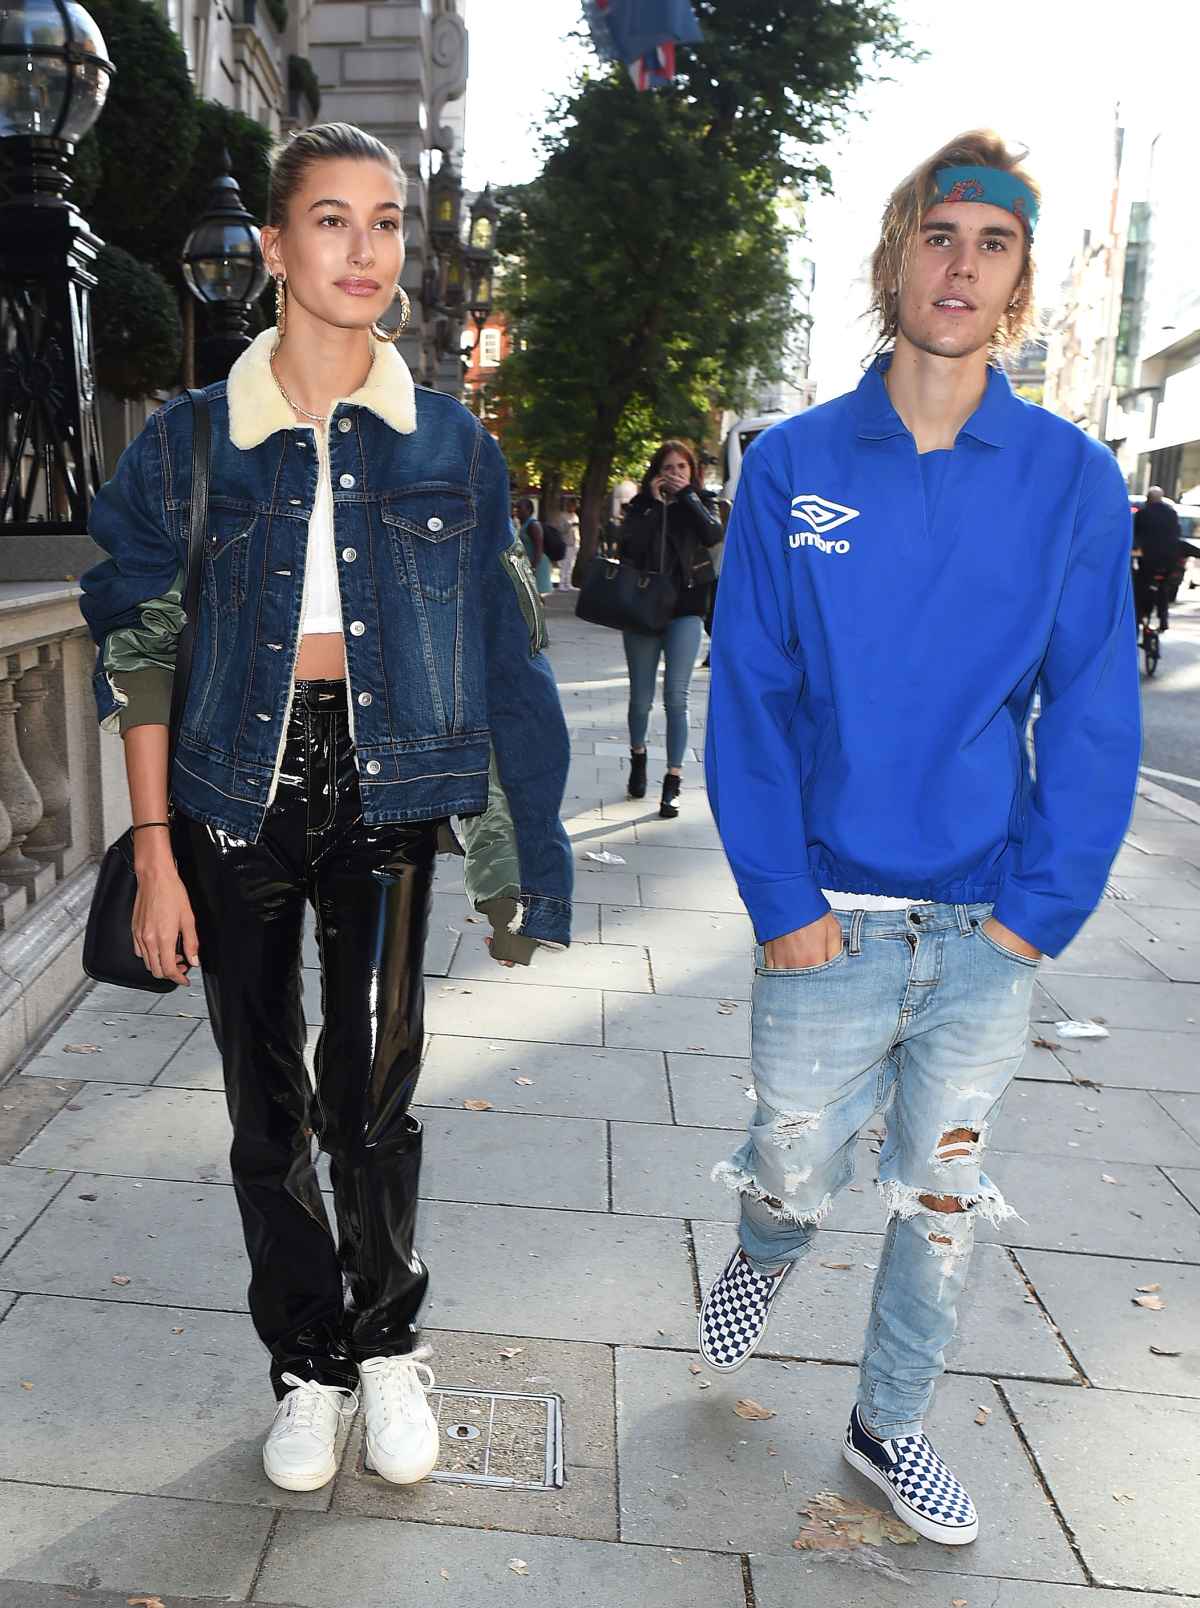 Hailey Baldwin With Justin Bieber August 28, 2019 – Star Style